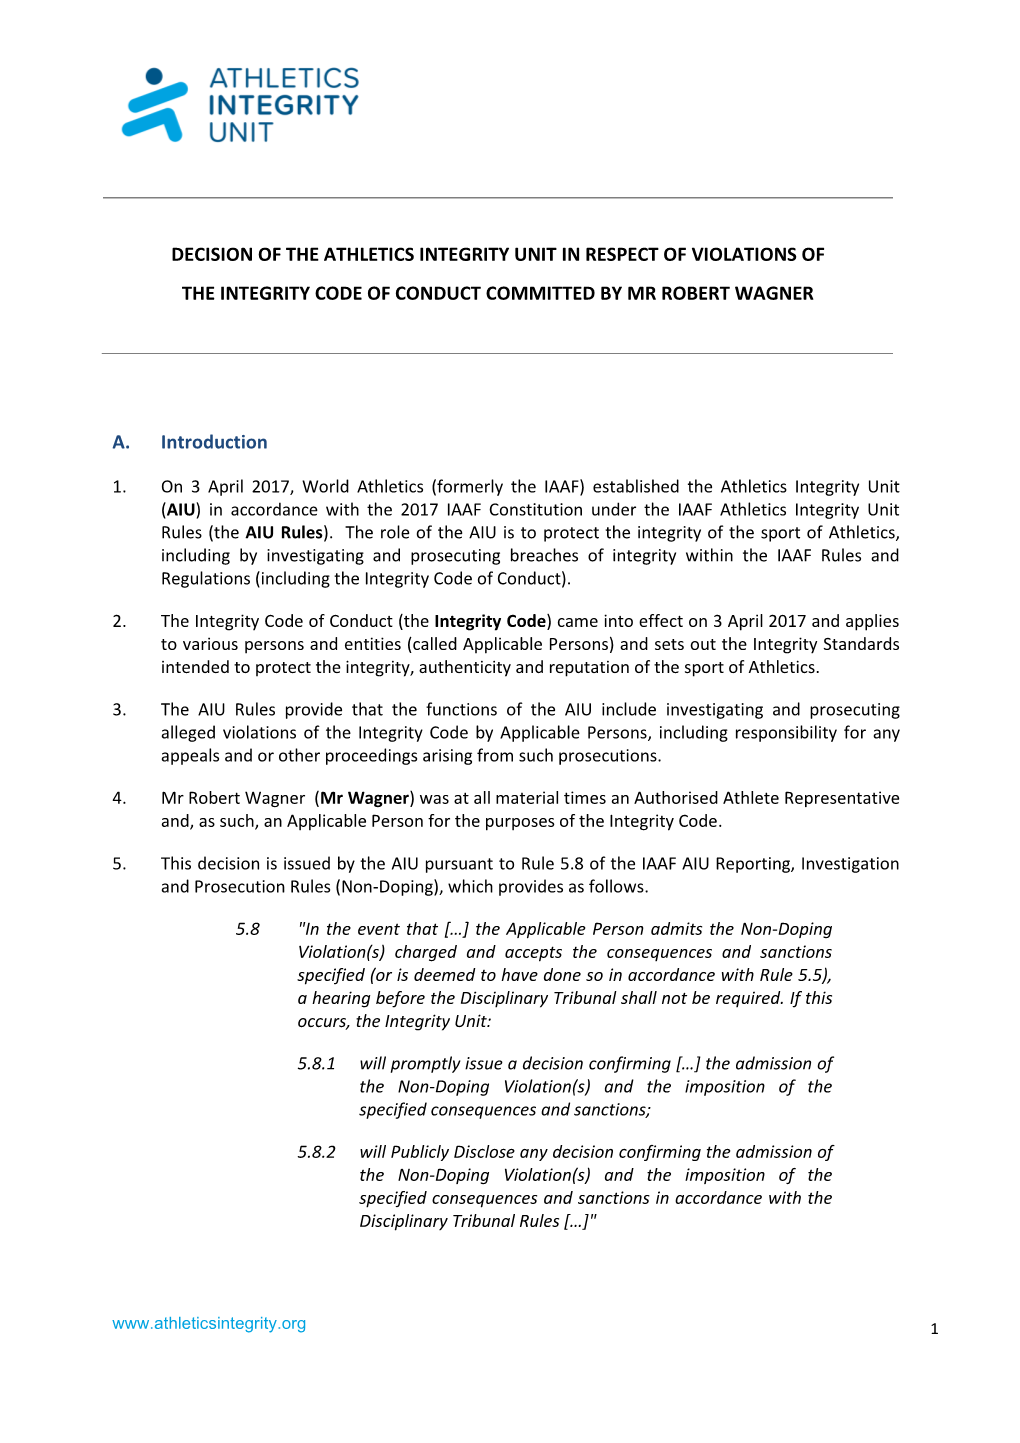 A. Introduction DECISION of the ATHLETICS INTEGRITY UNIT IN